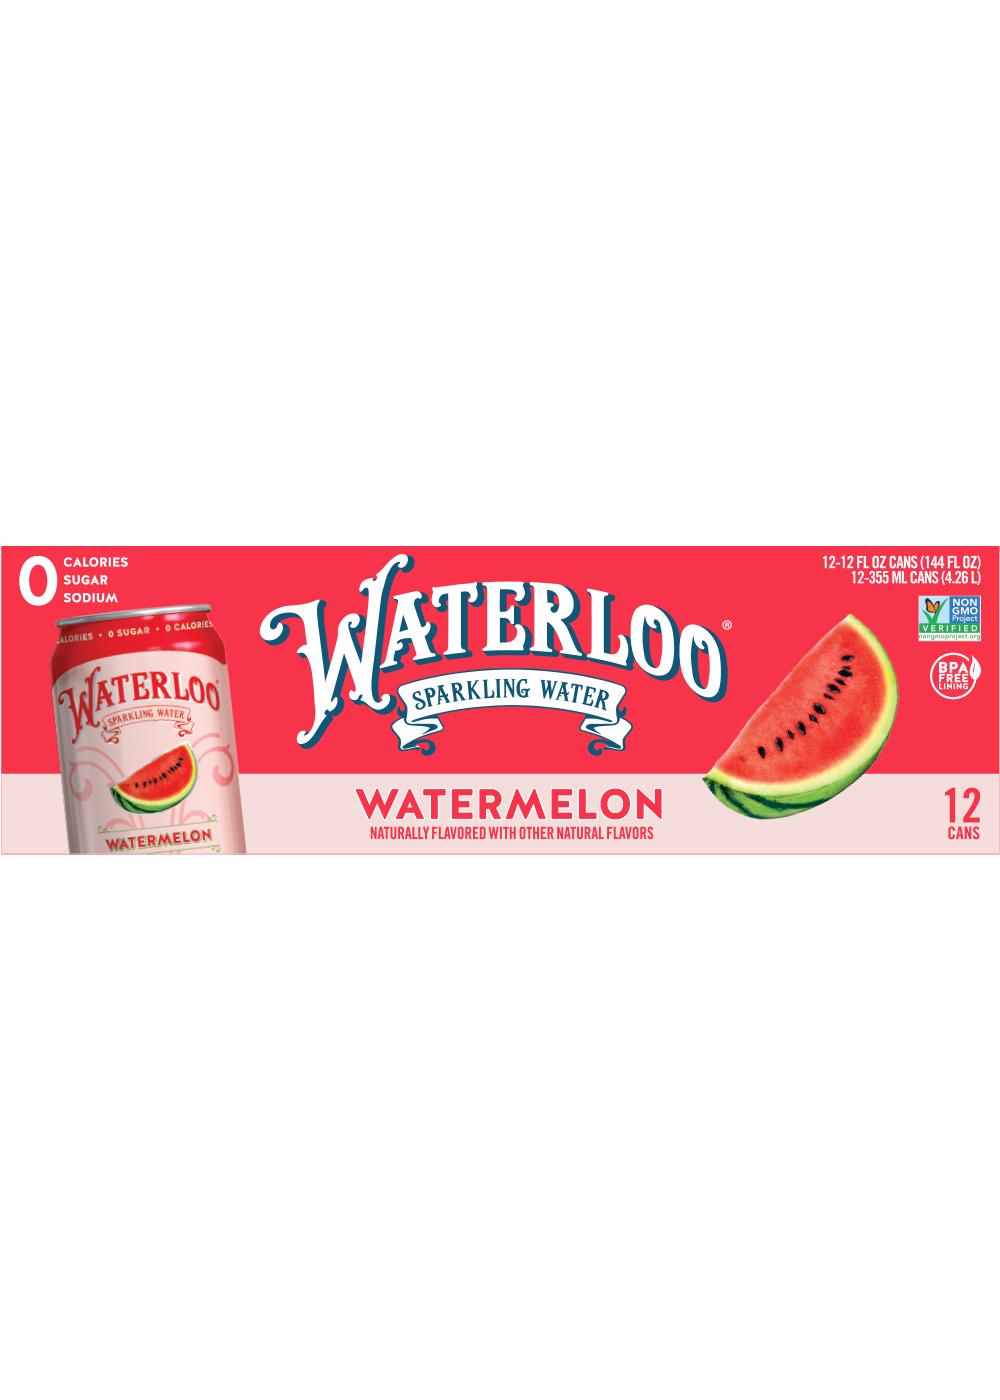 Waterloo Watermelon Sparkling Water 12 pk Cans; image 1 of 2